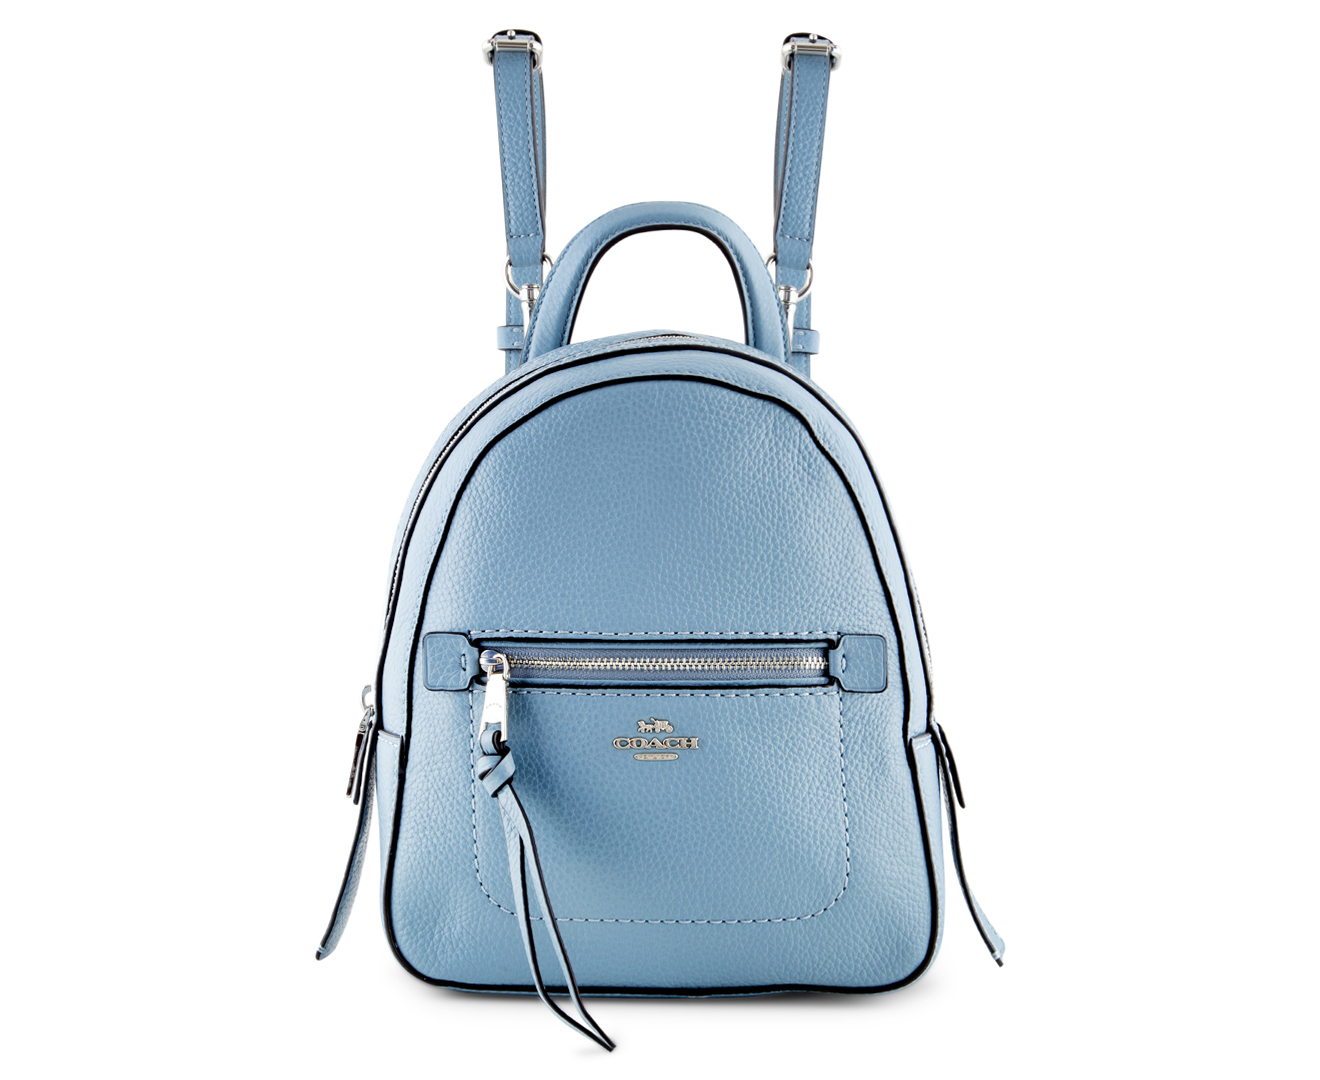 Coach Pebble Leather Andi Backpack - Cornflower | Catch.co.nz